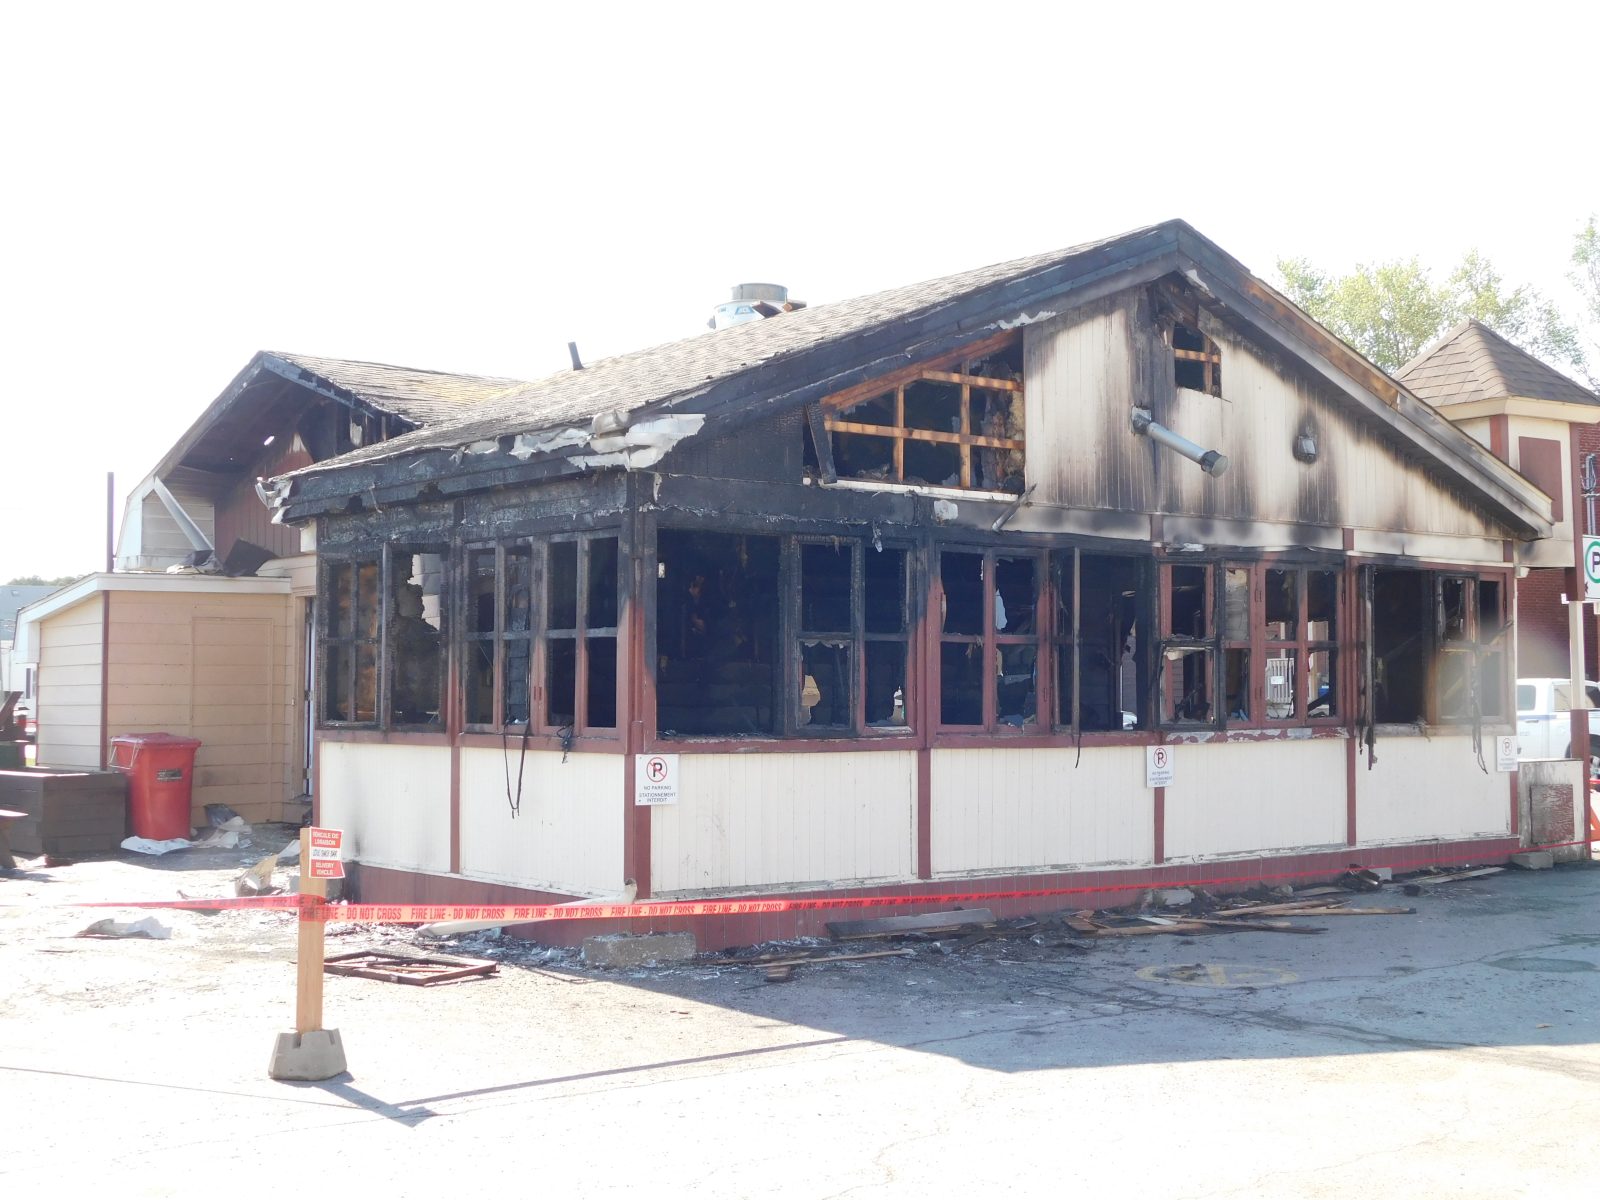 Arson charge over snack bar fire